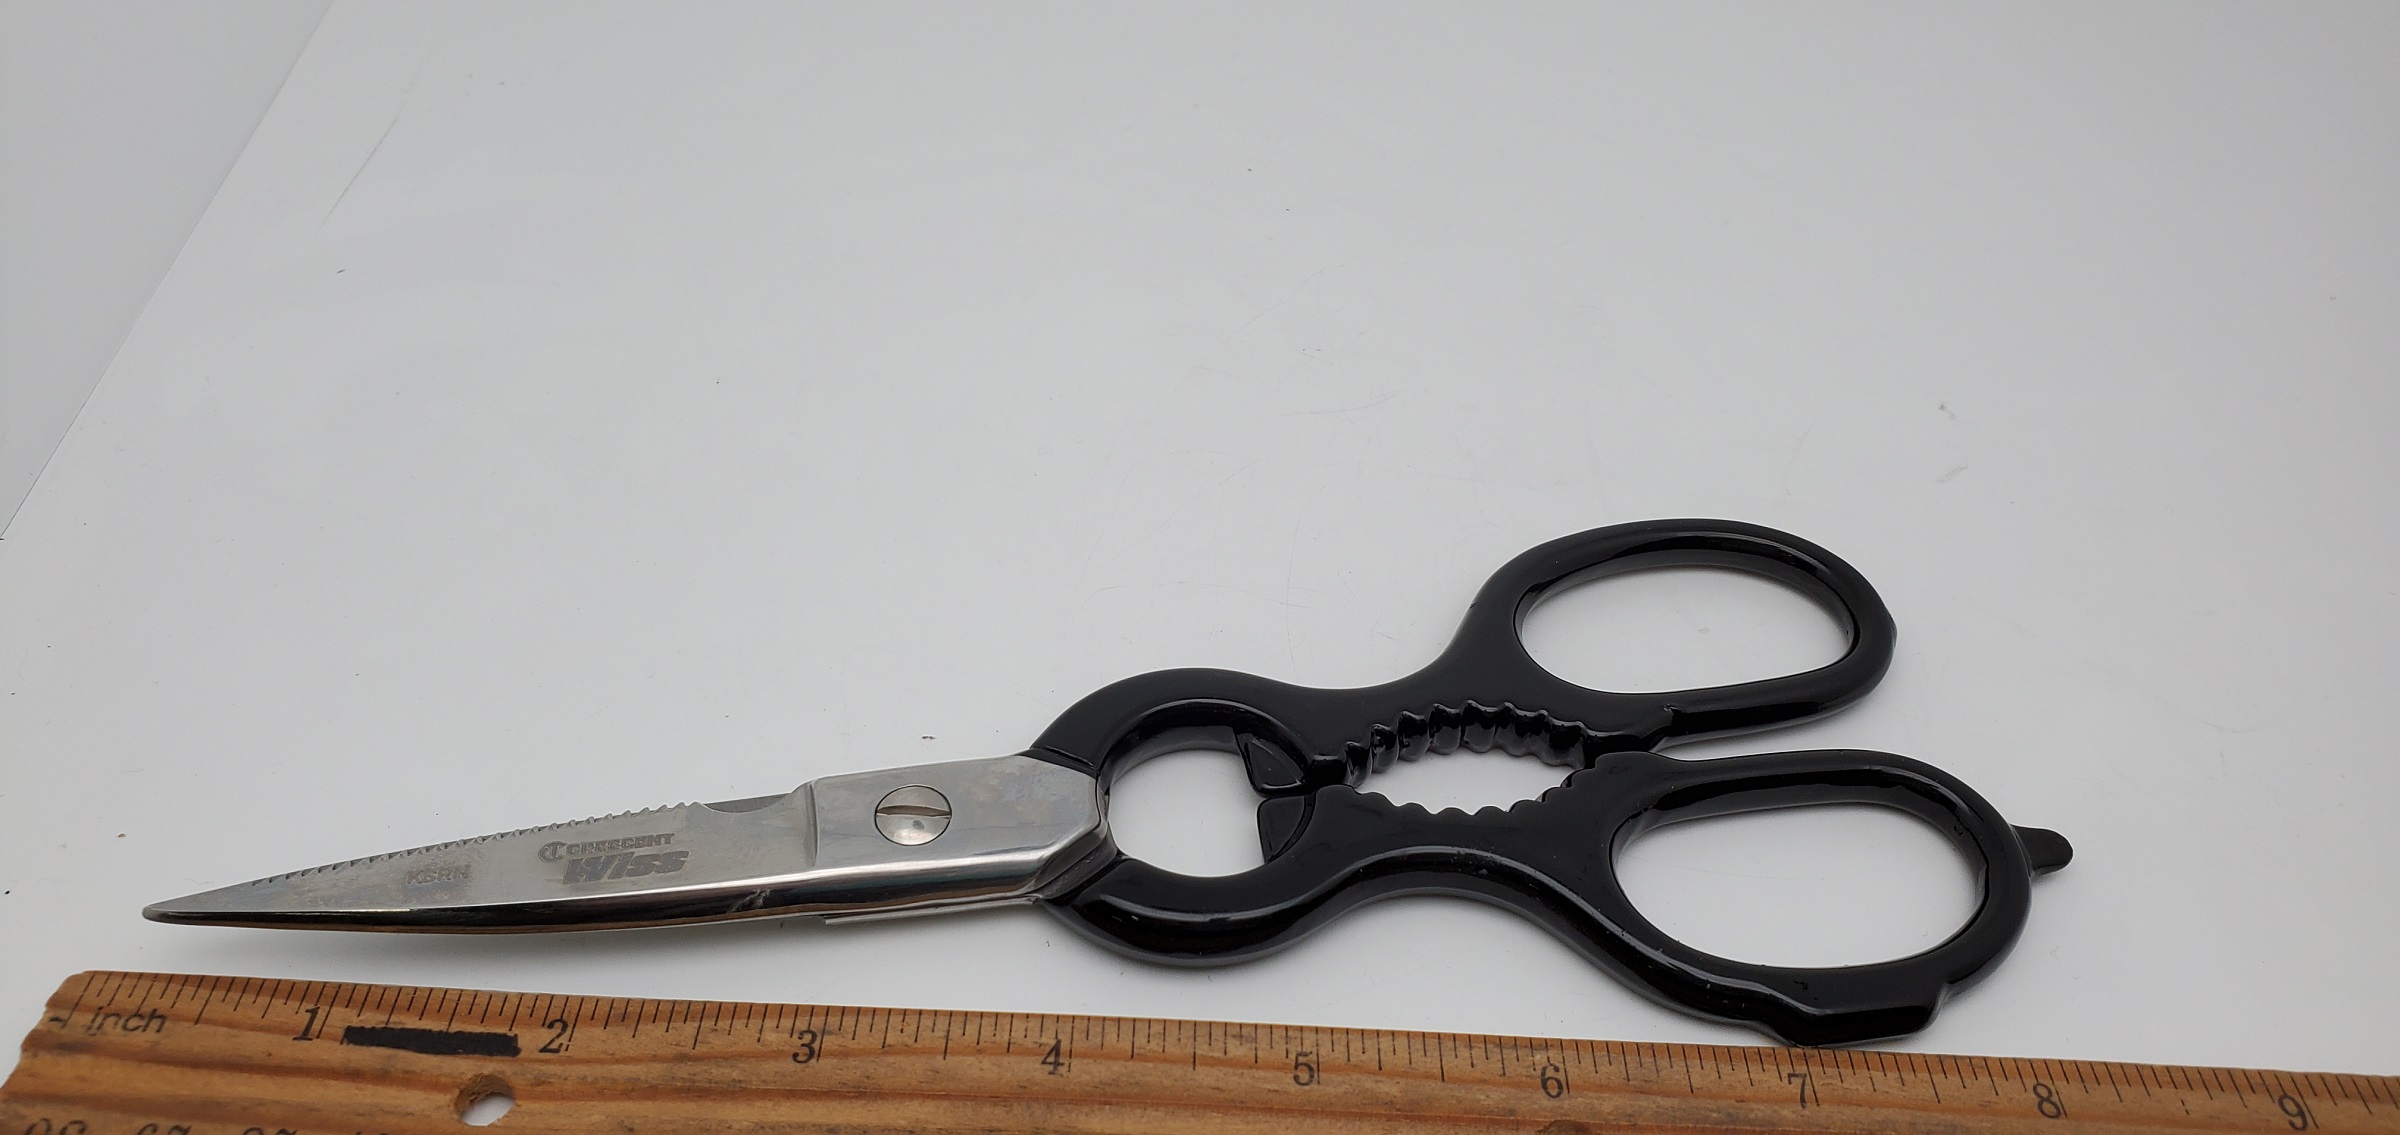 Vintage WISS CB 9 Inch Pinking Shears Industrial Sewing Fabric Scissors USA